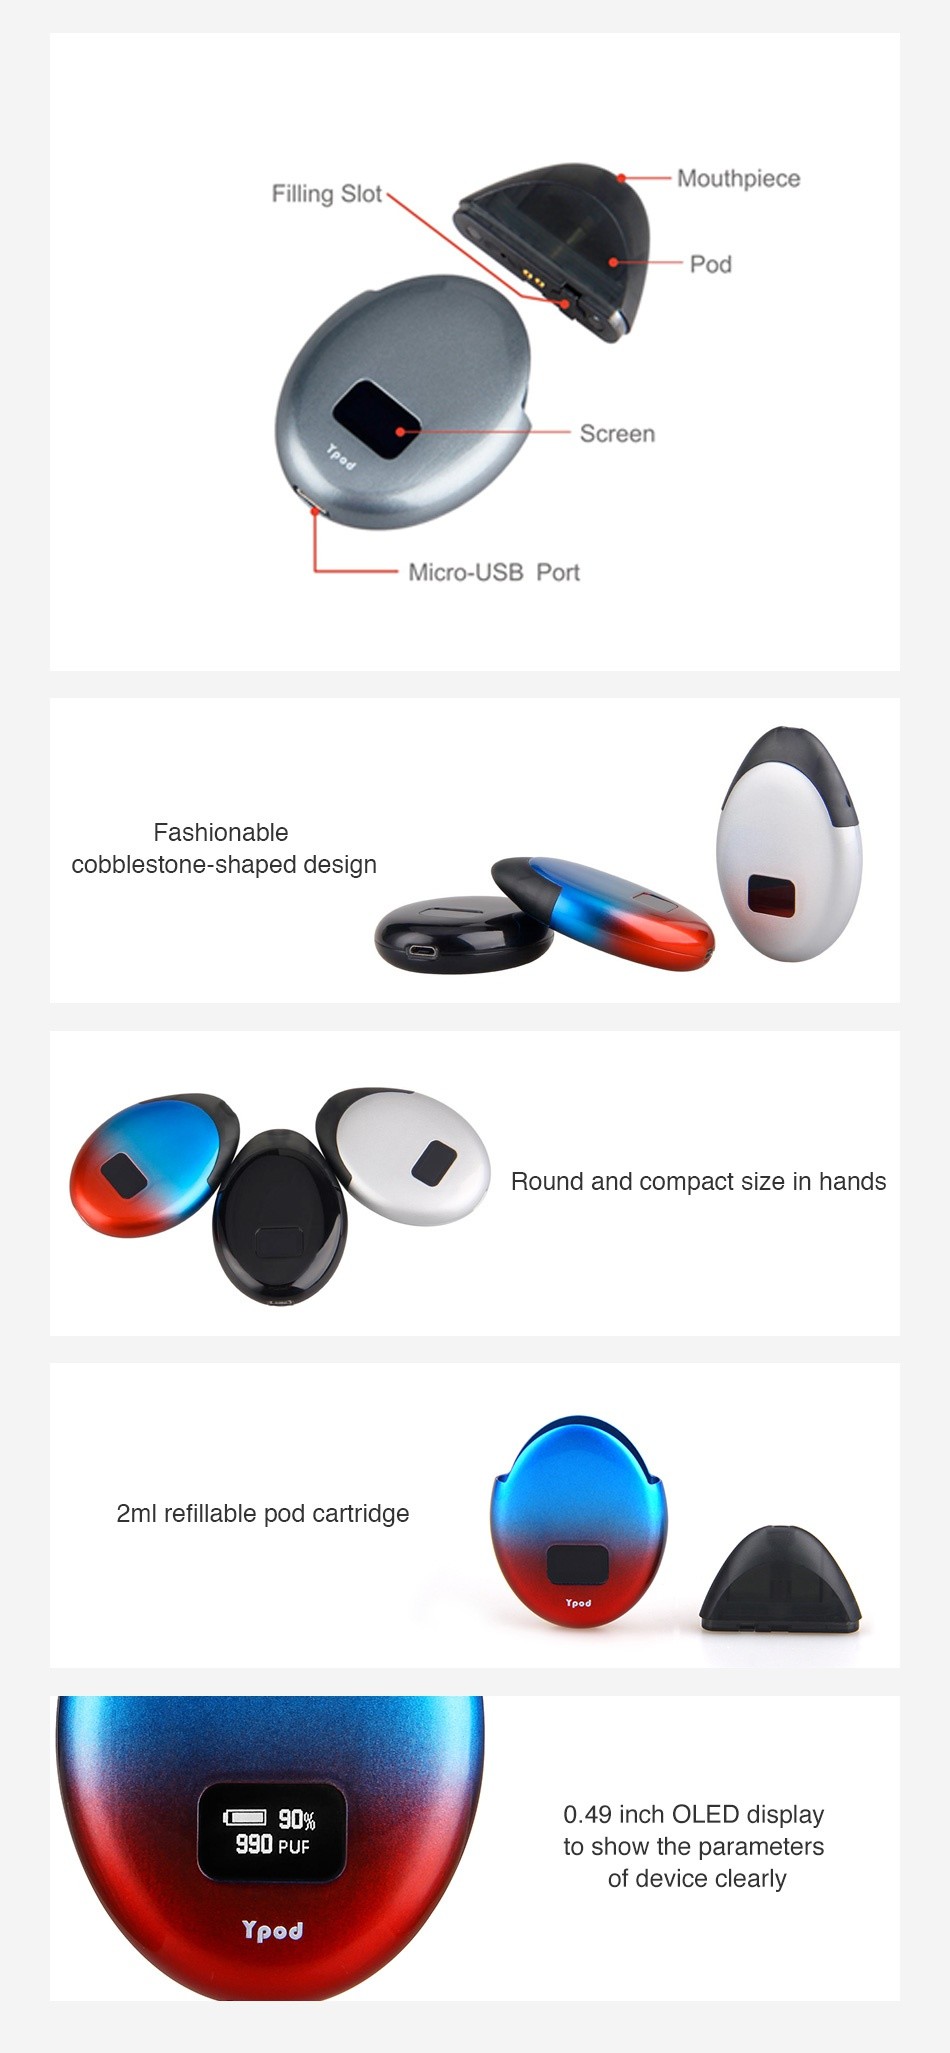 Yosta Ypod Pod Starter Kit 500mAh Mouthpiece Filling slot Pod Screen Micro USB Port Fashionable cobblestone shaped design Round and compact size in hands 2ml refillable pod cartridge  90  0 49 inch OLEd display 990 PUF to show the parameters of device clearl Pod